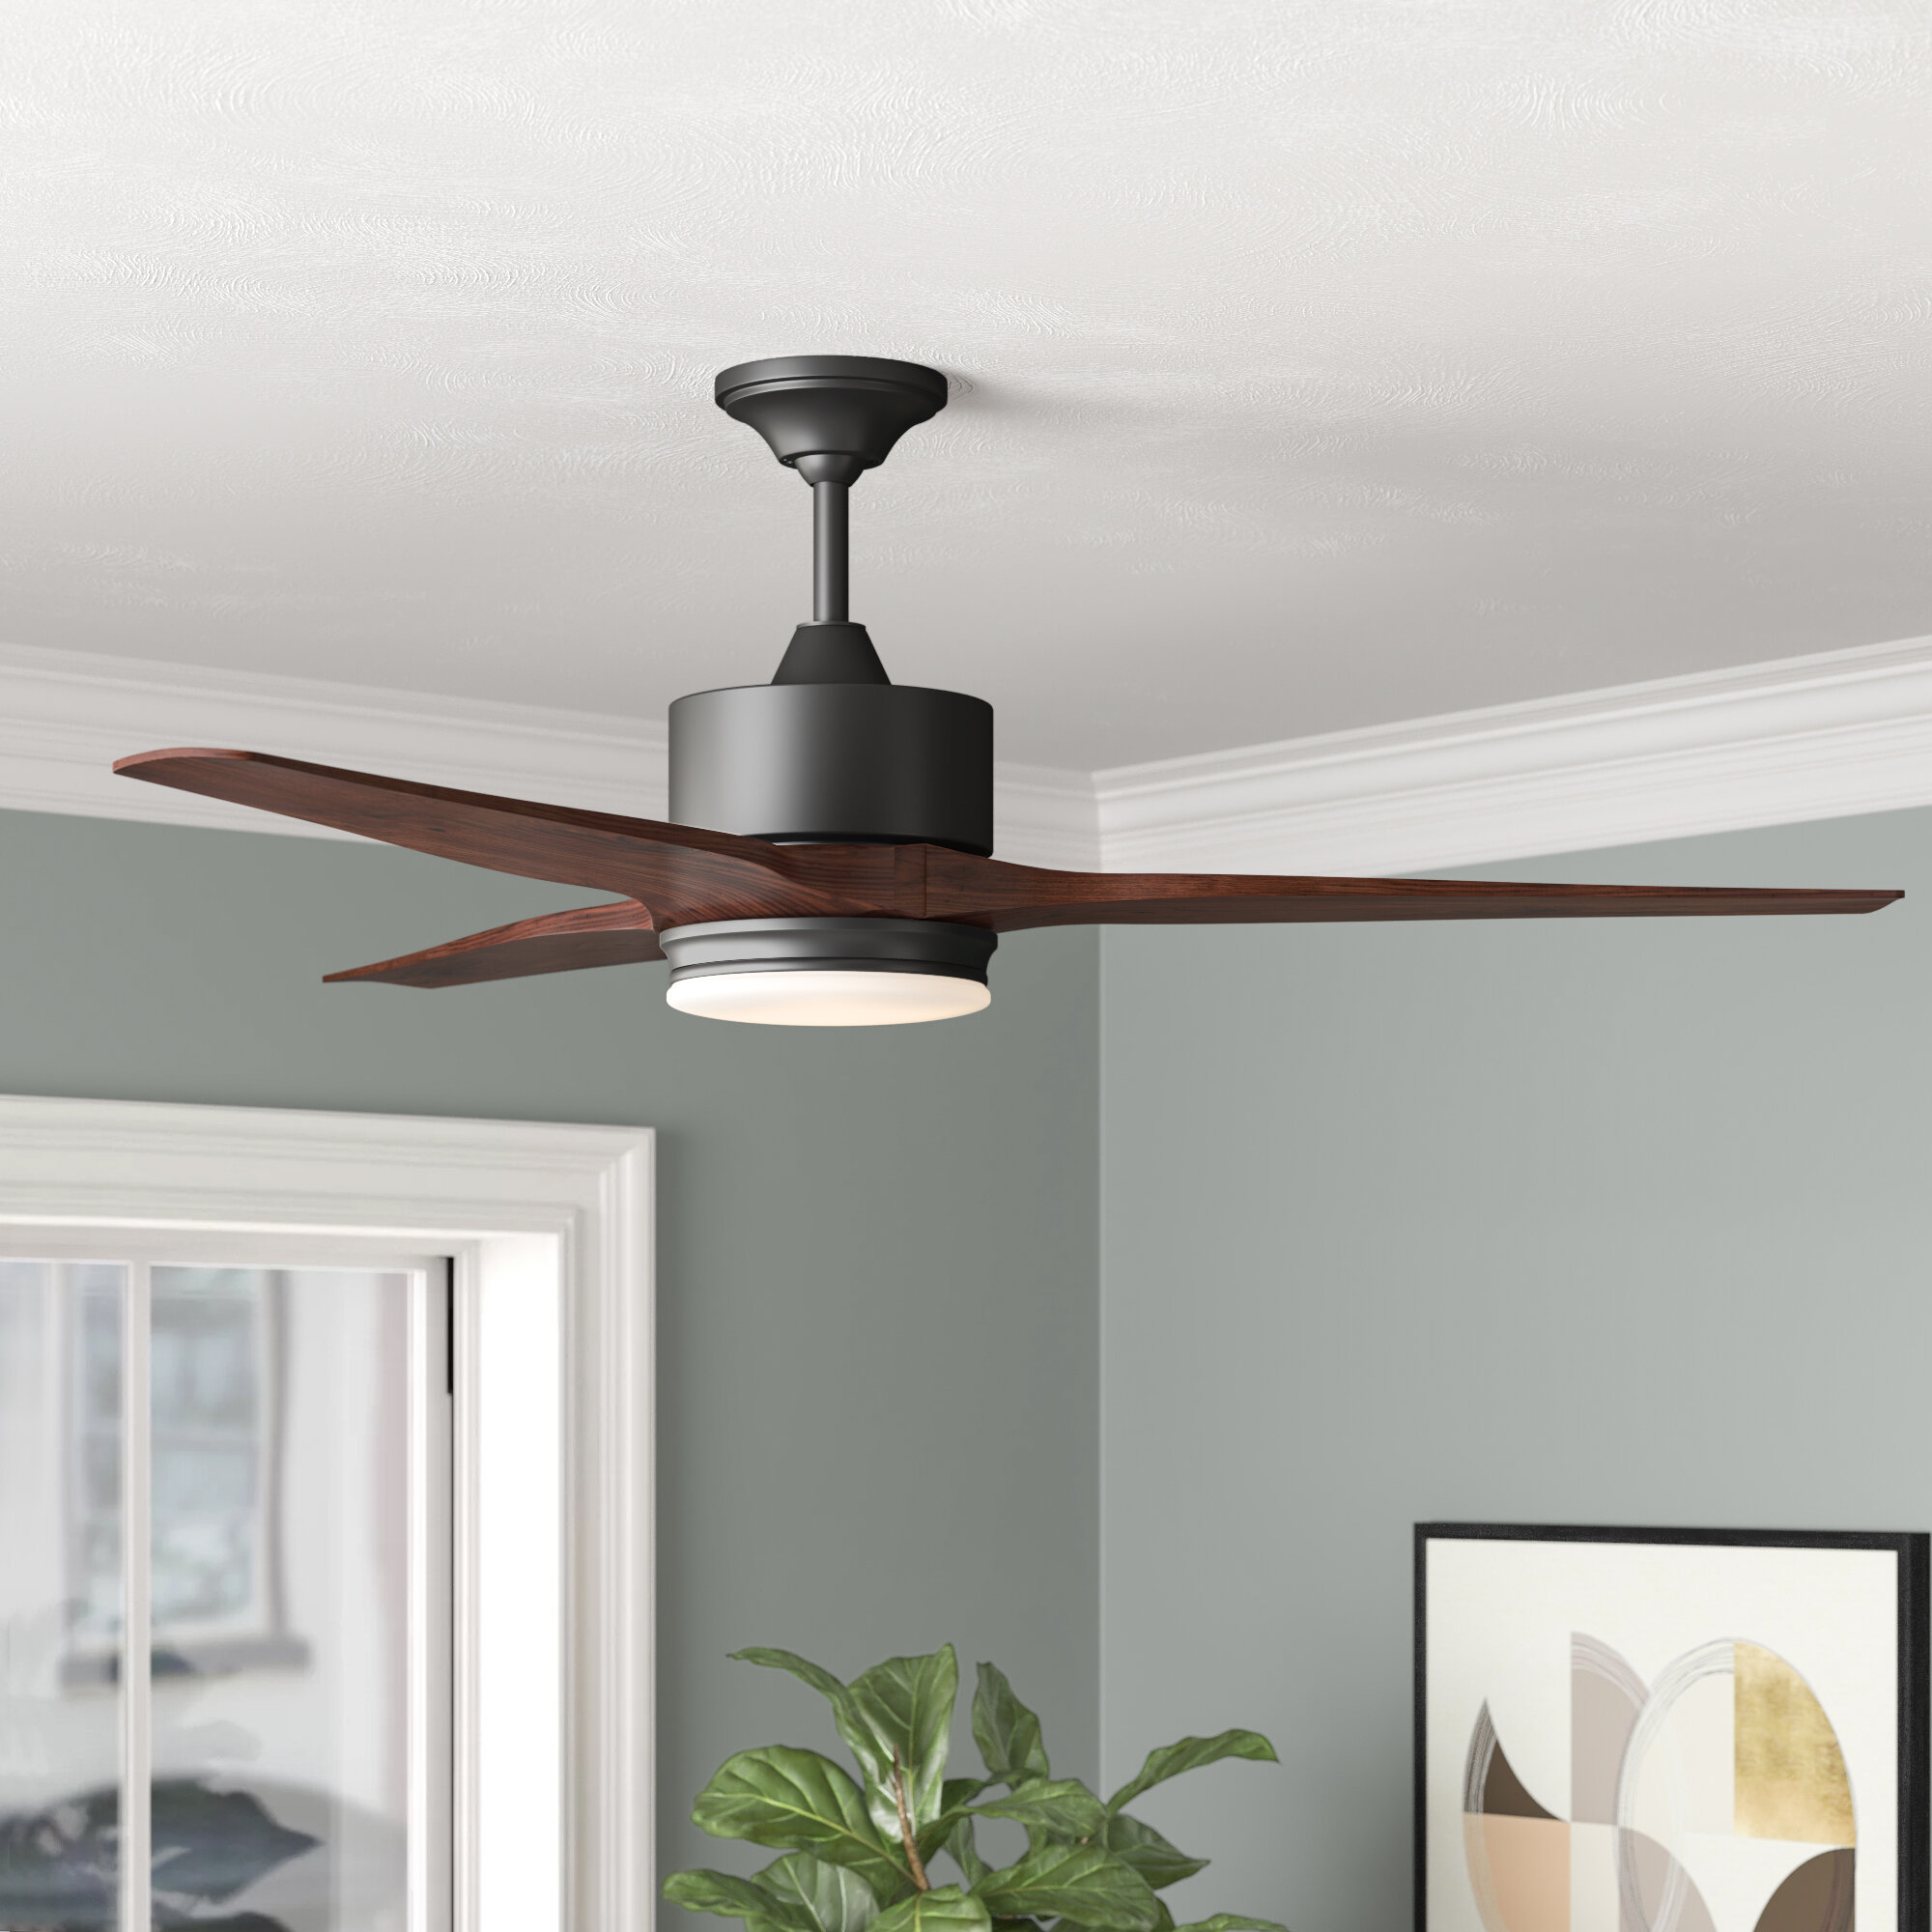 LED Indoor/Outdoor Oil Rubbed Bronze Ceiling Fan with Light Kit Umber 46 in 